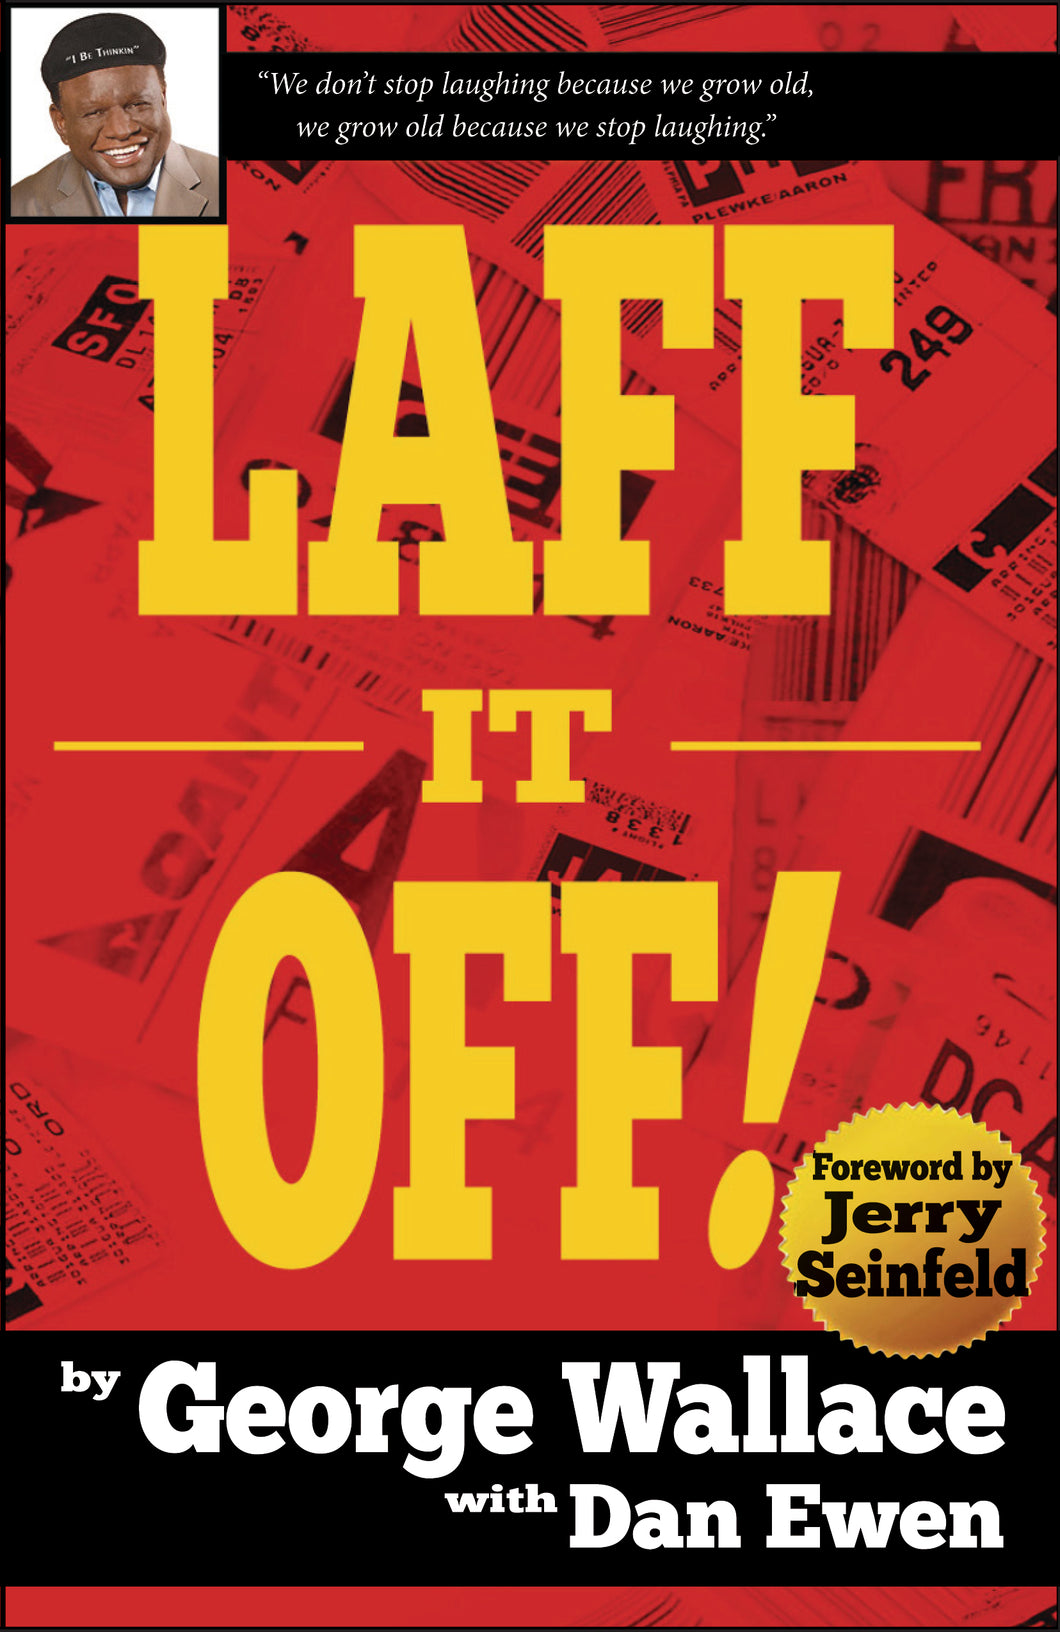 Laff it Off! (Softcover)